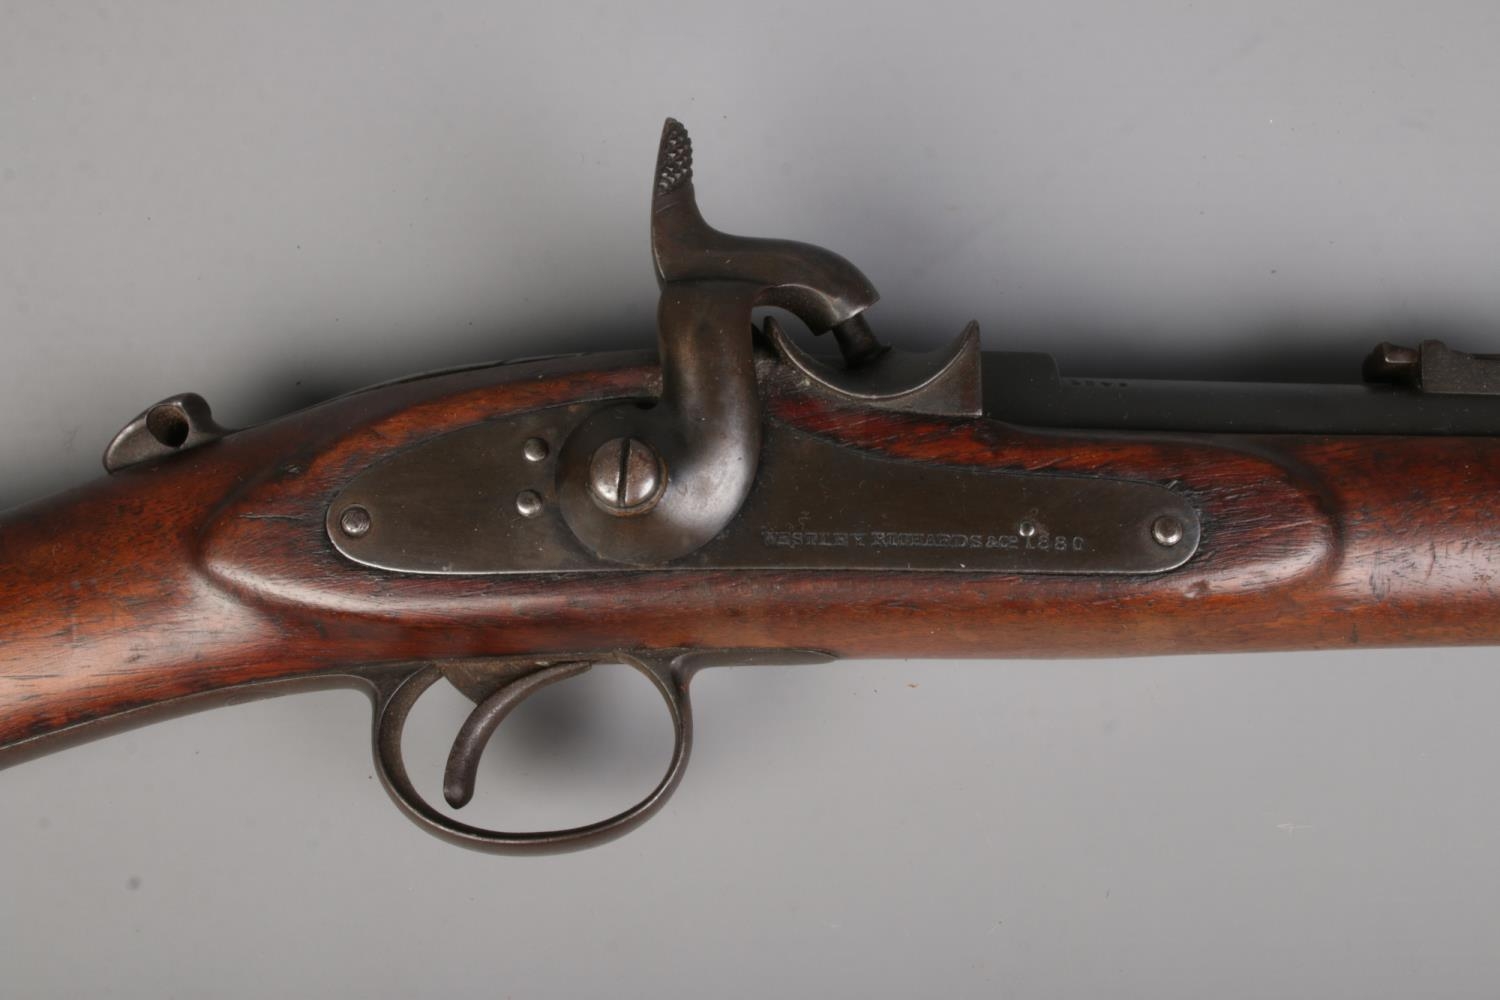 A Westley Richards & Co monkey tail carbine with walnut stock. Stamped Whitworth Patent. Barrel